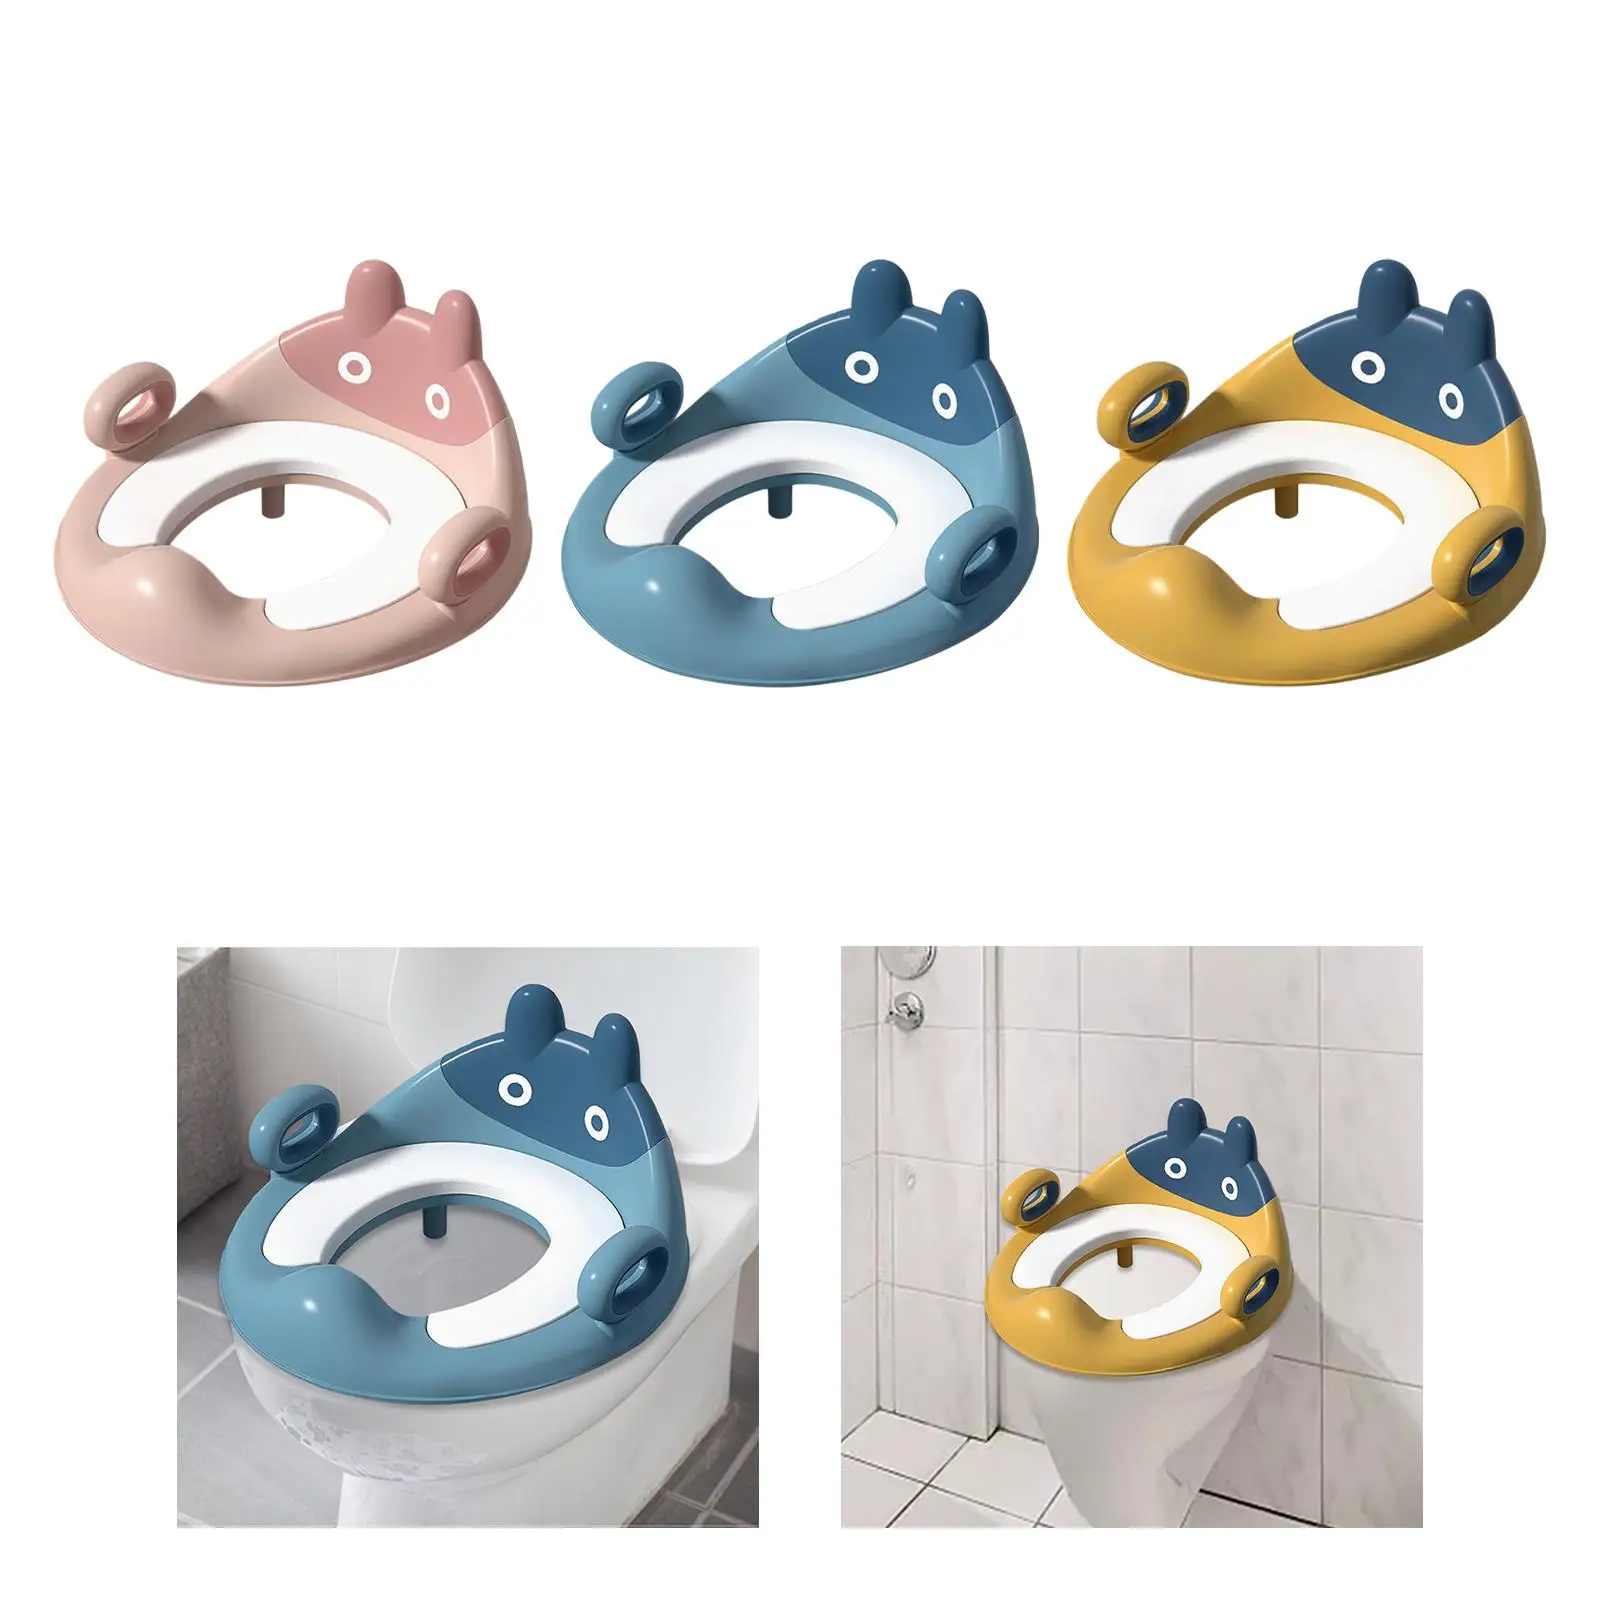 Toilet Training Seat with Guard Comfortable Fits Round & Oval Toilets Training Toilet for for Kids Boy and Girl Child